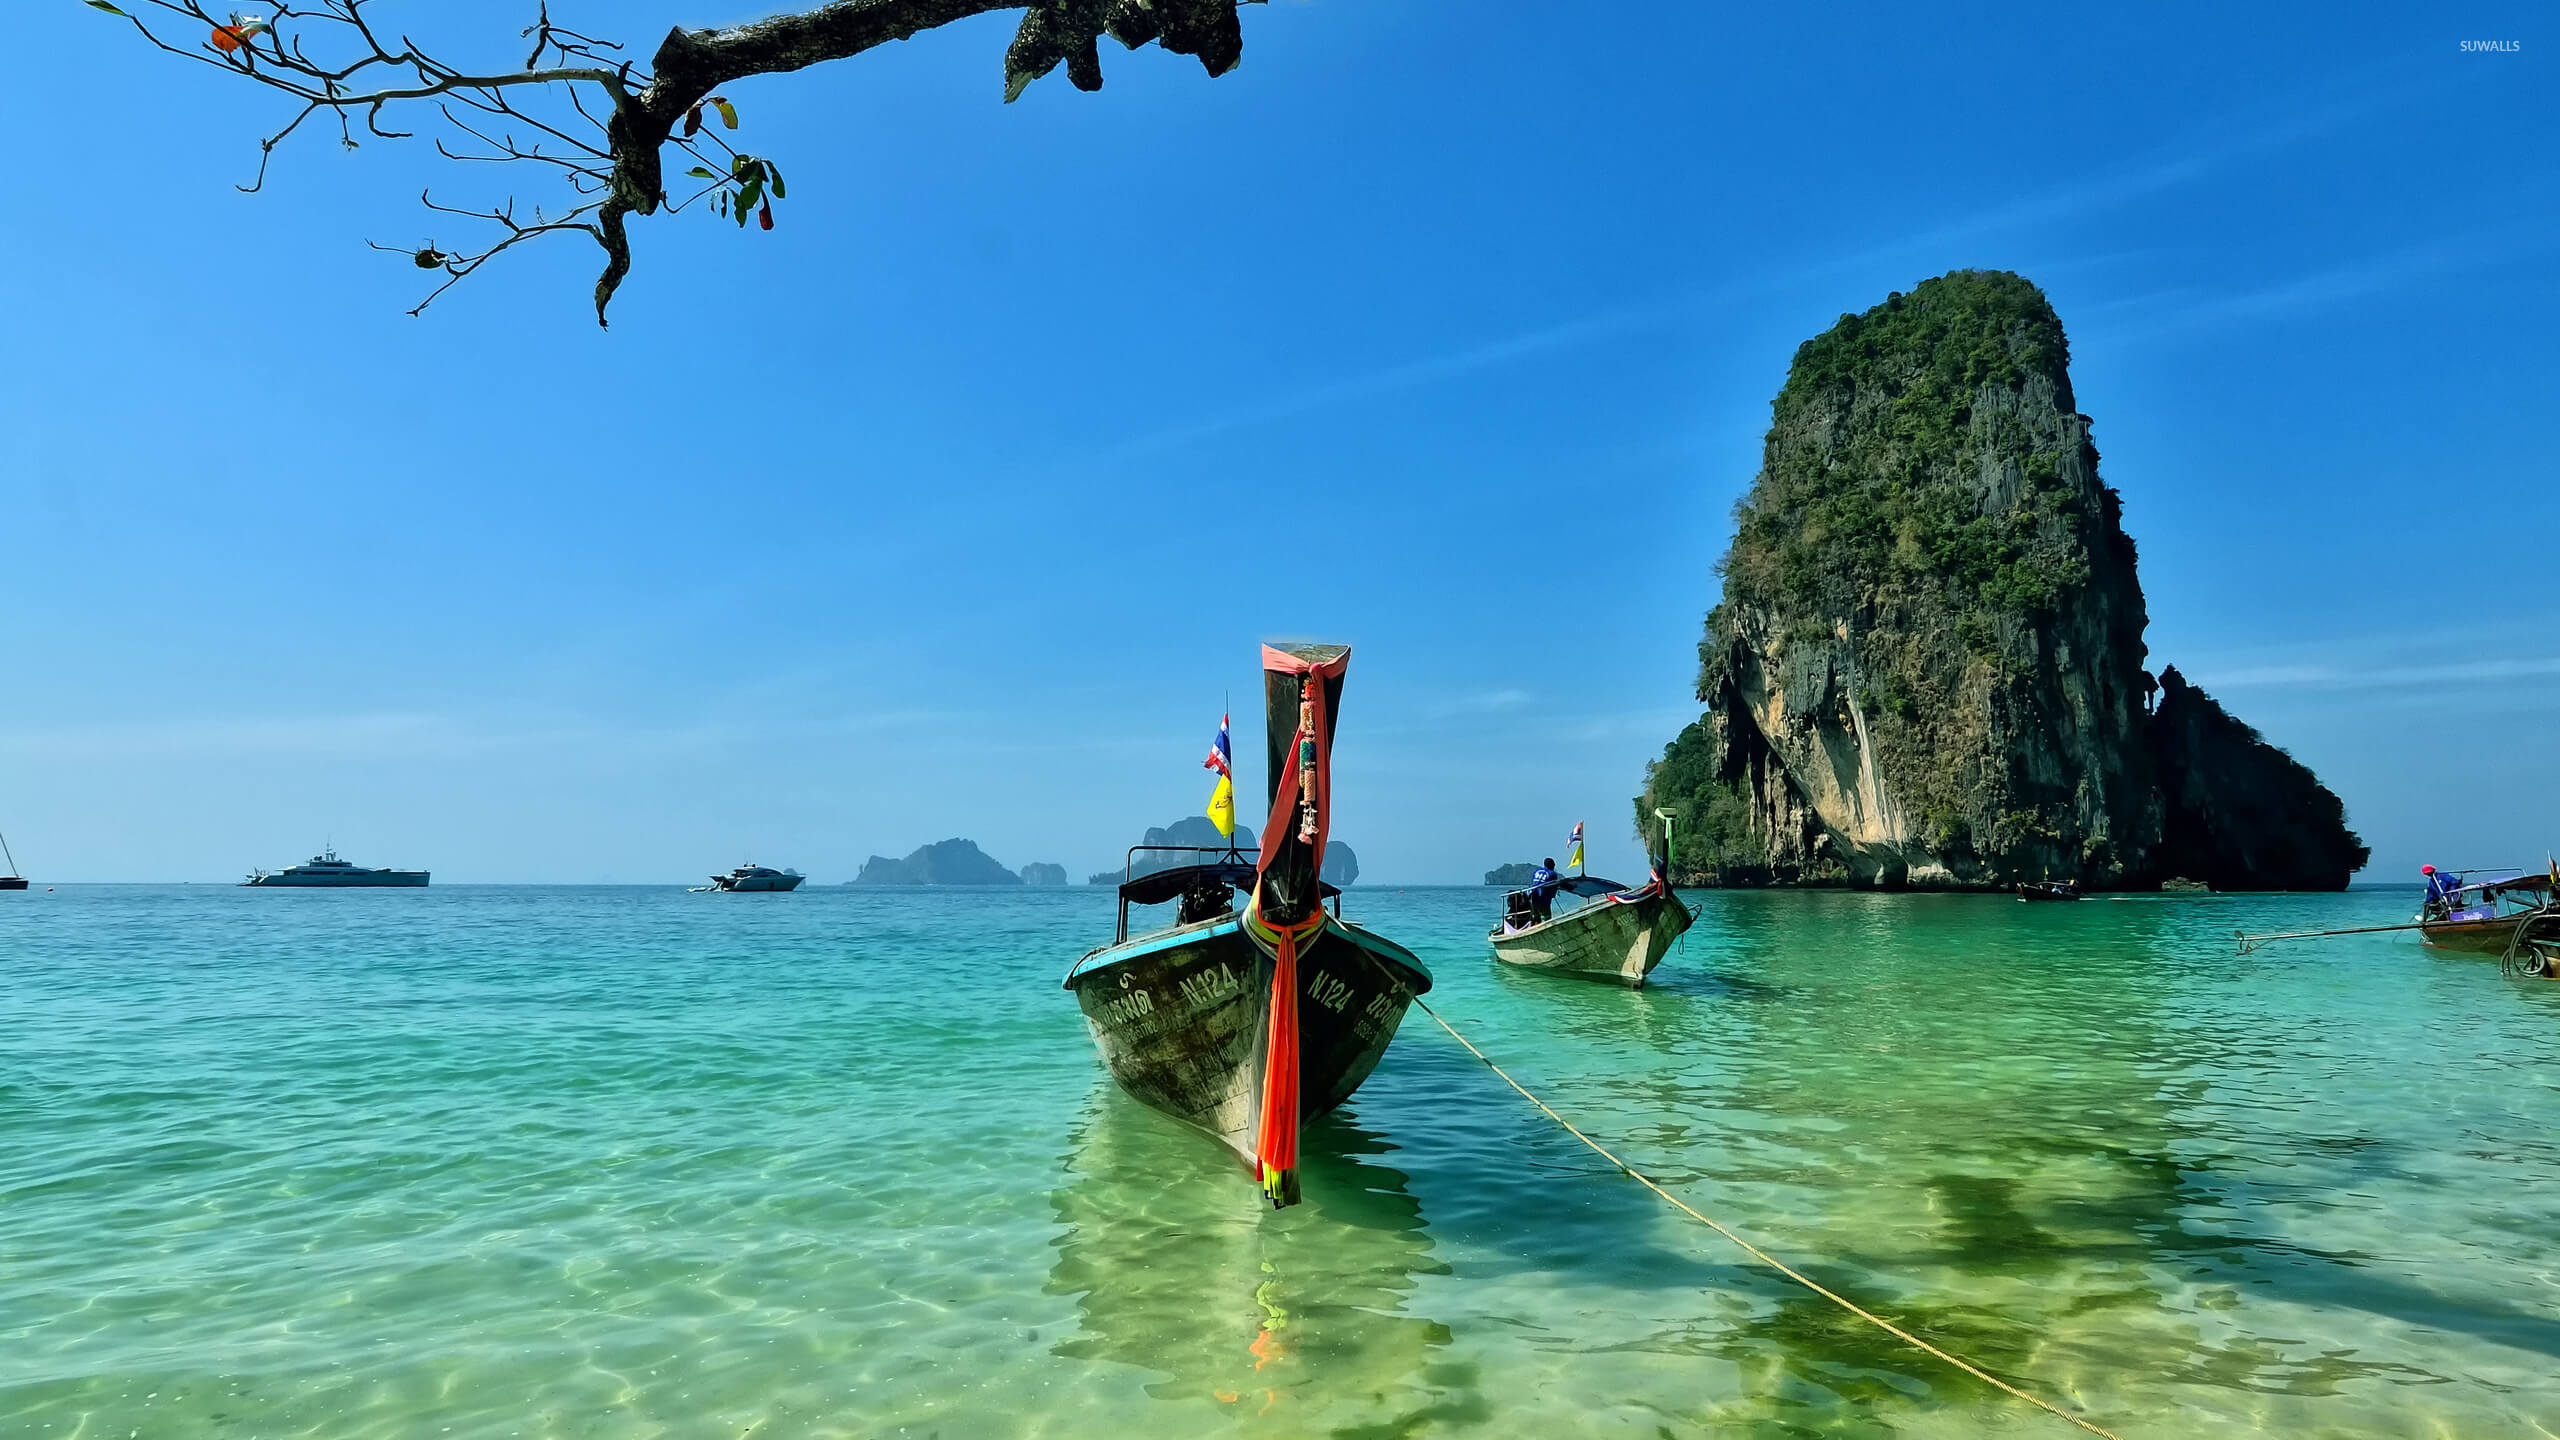 Winter 15 Days Thailand Holiday Travel & Tour Package